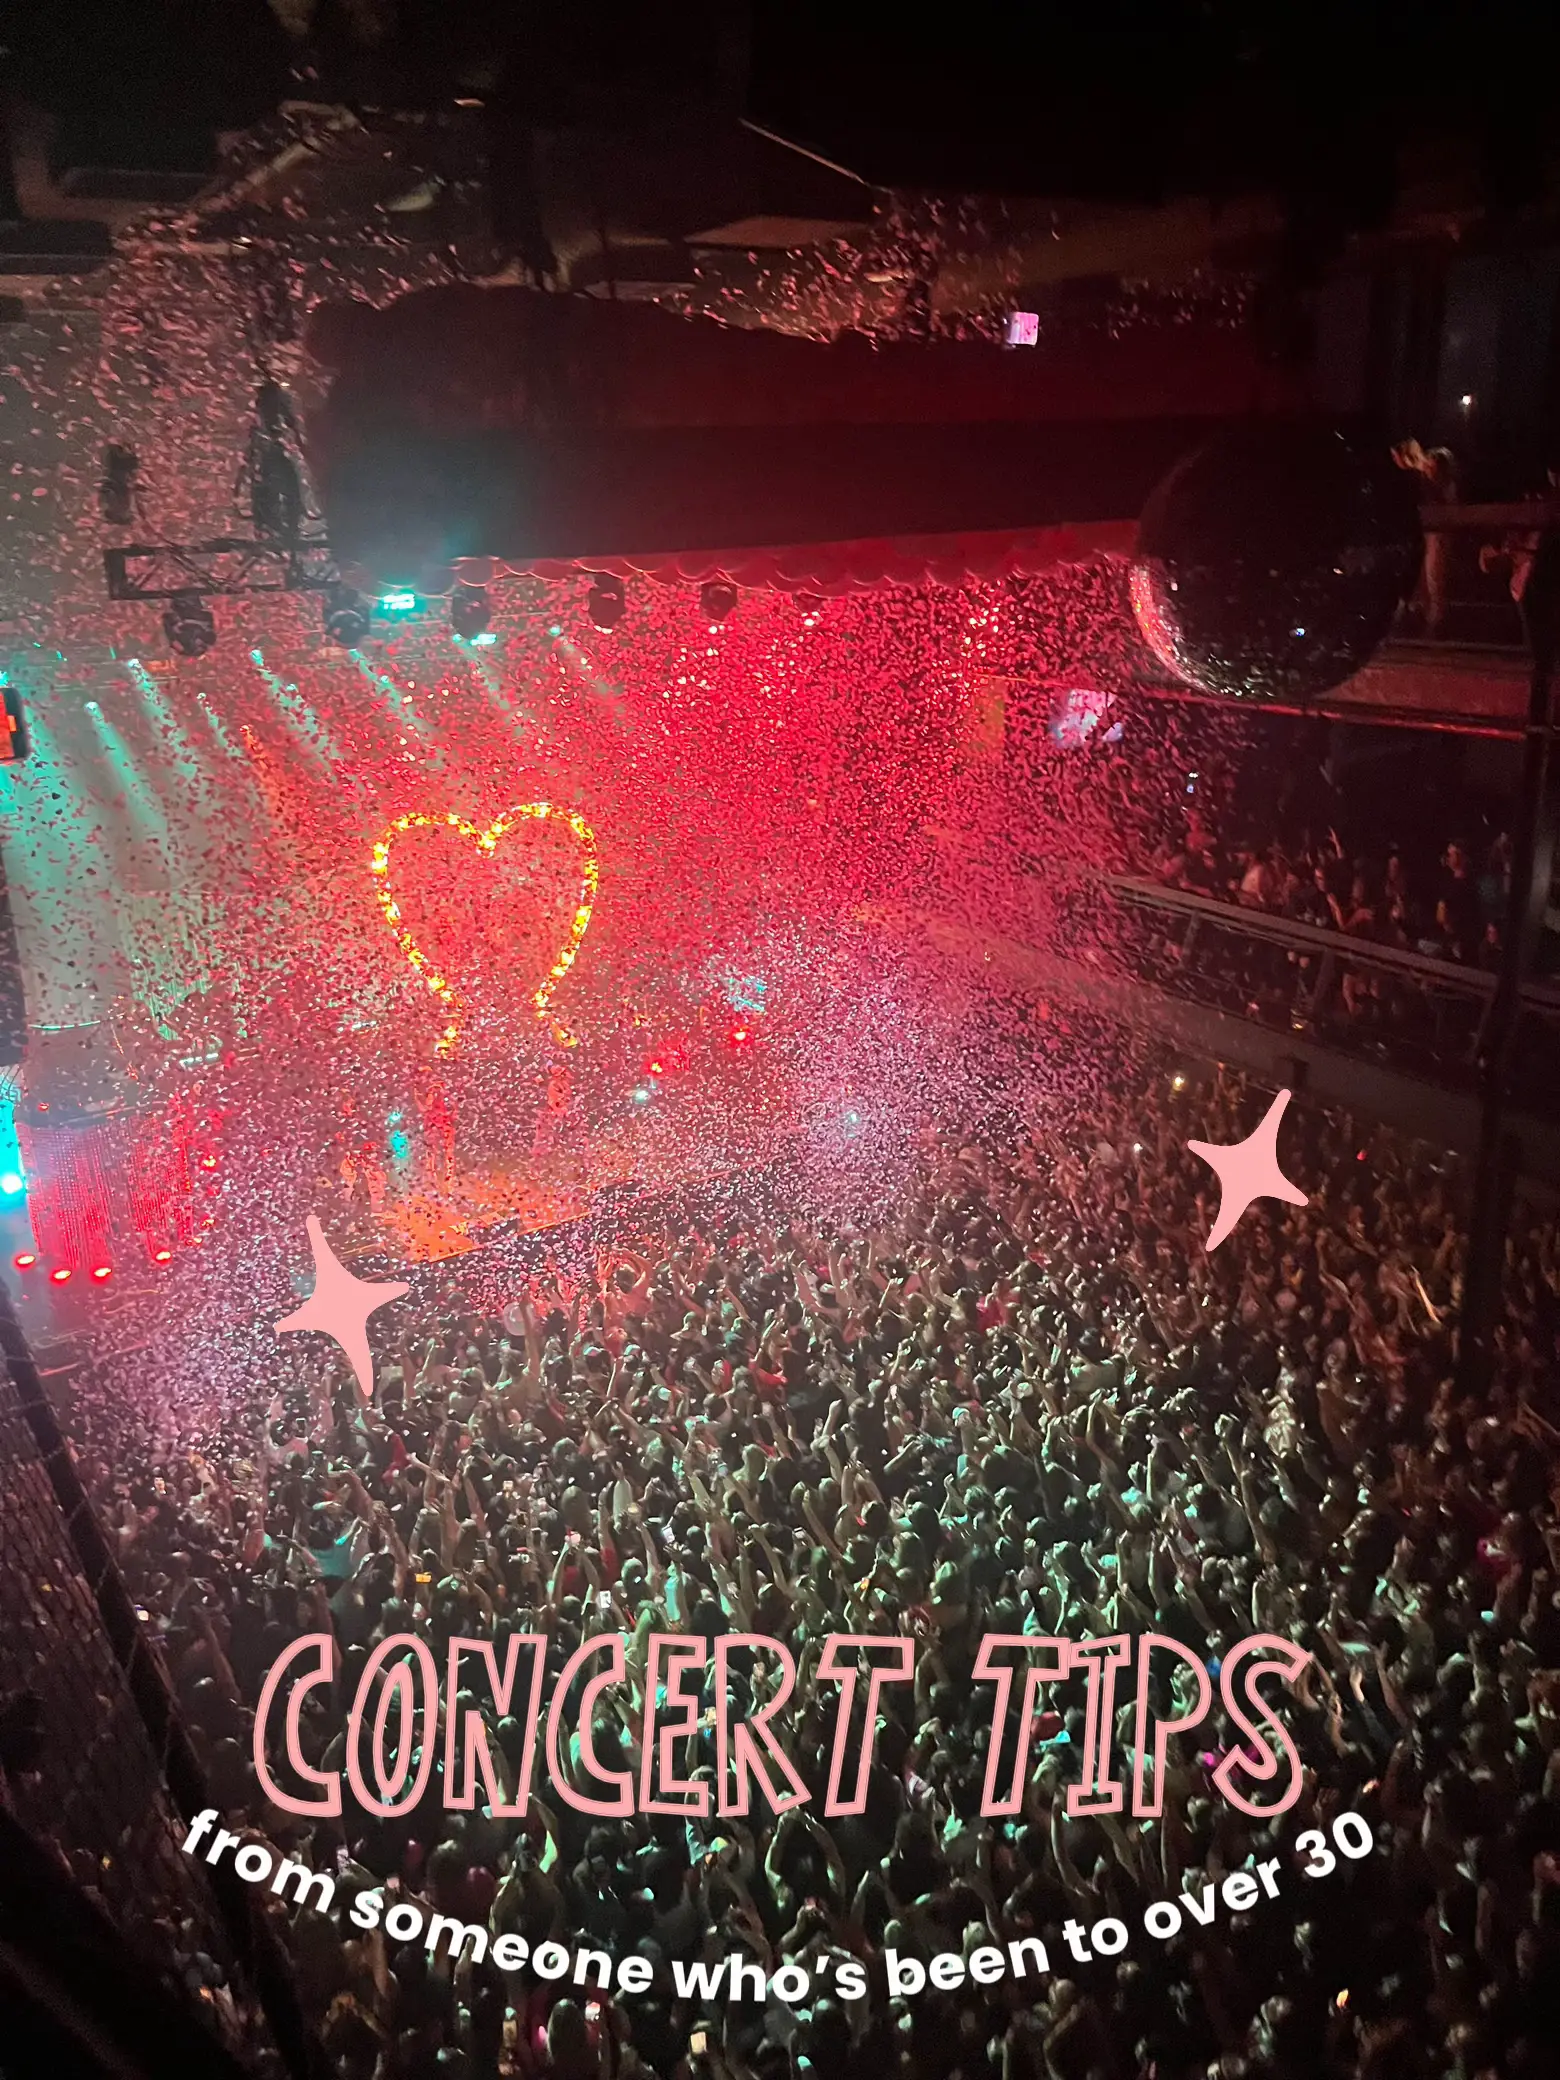  A concert tips sign with a colorful background.